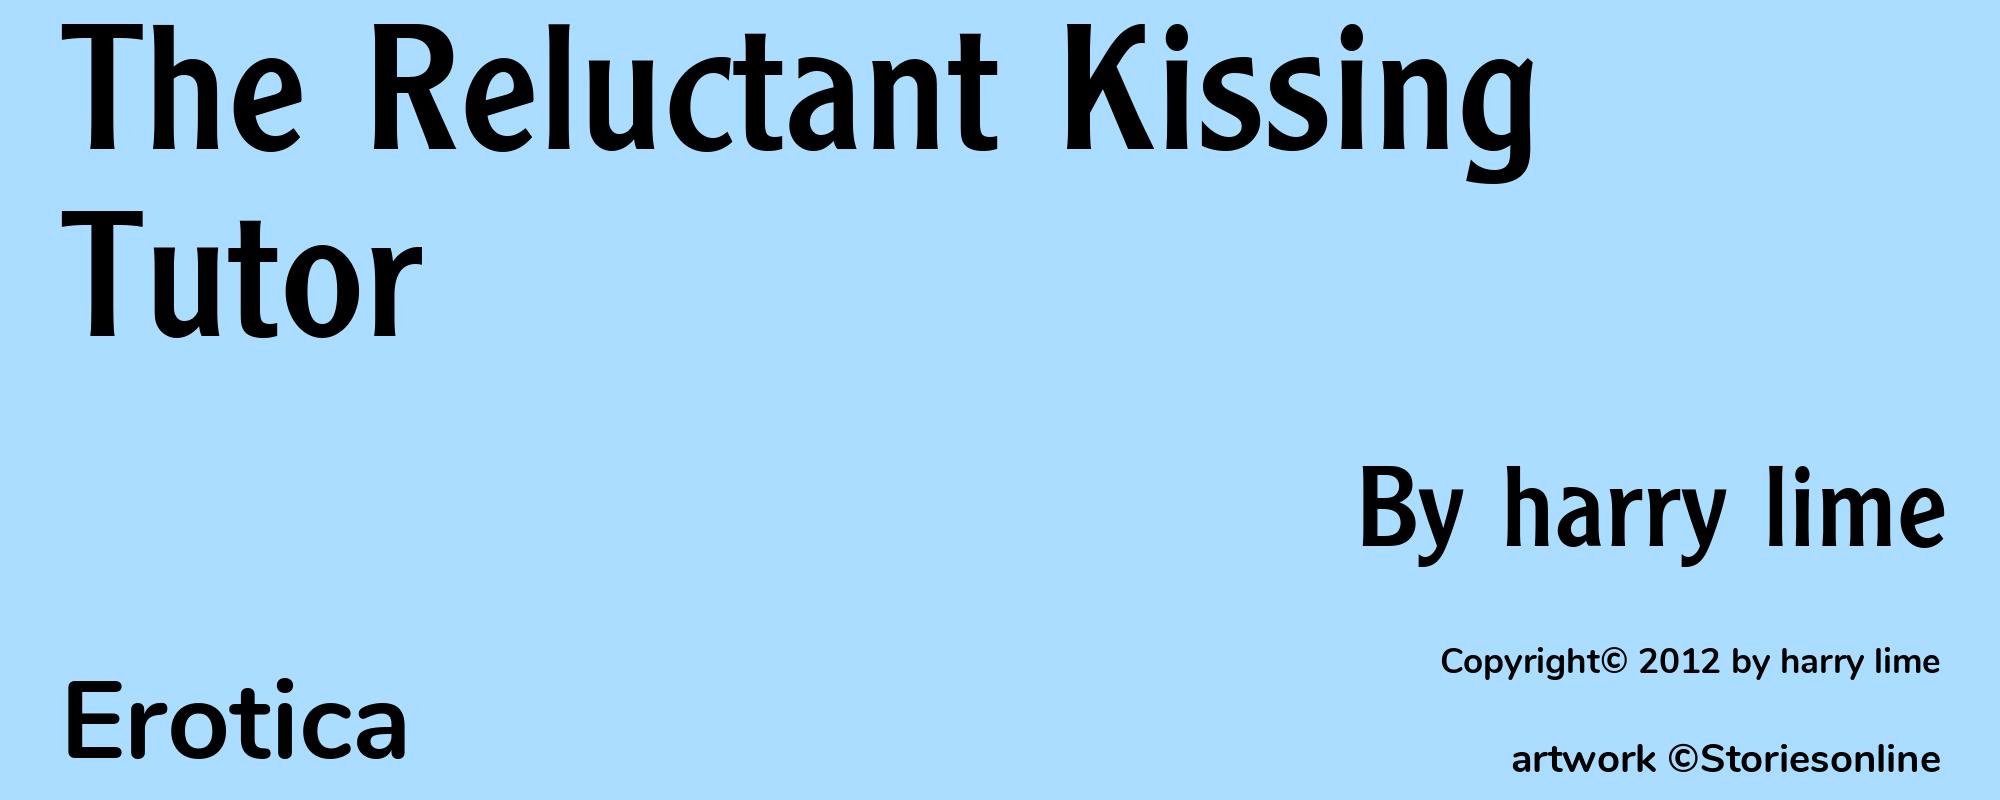 The Reluctant Kissing Tutor - Cover